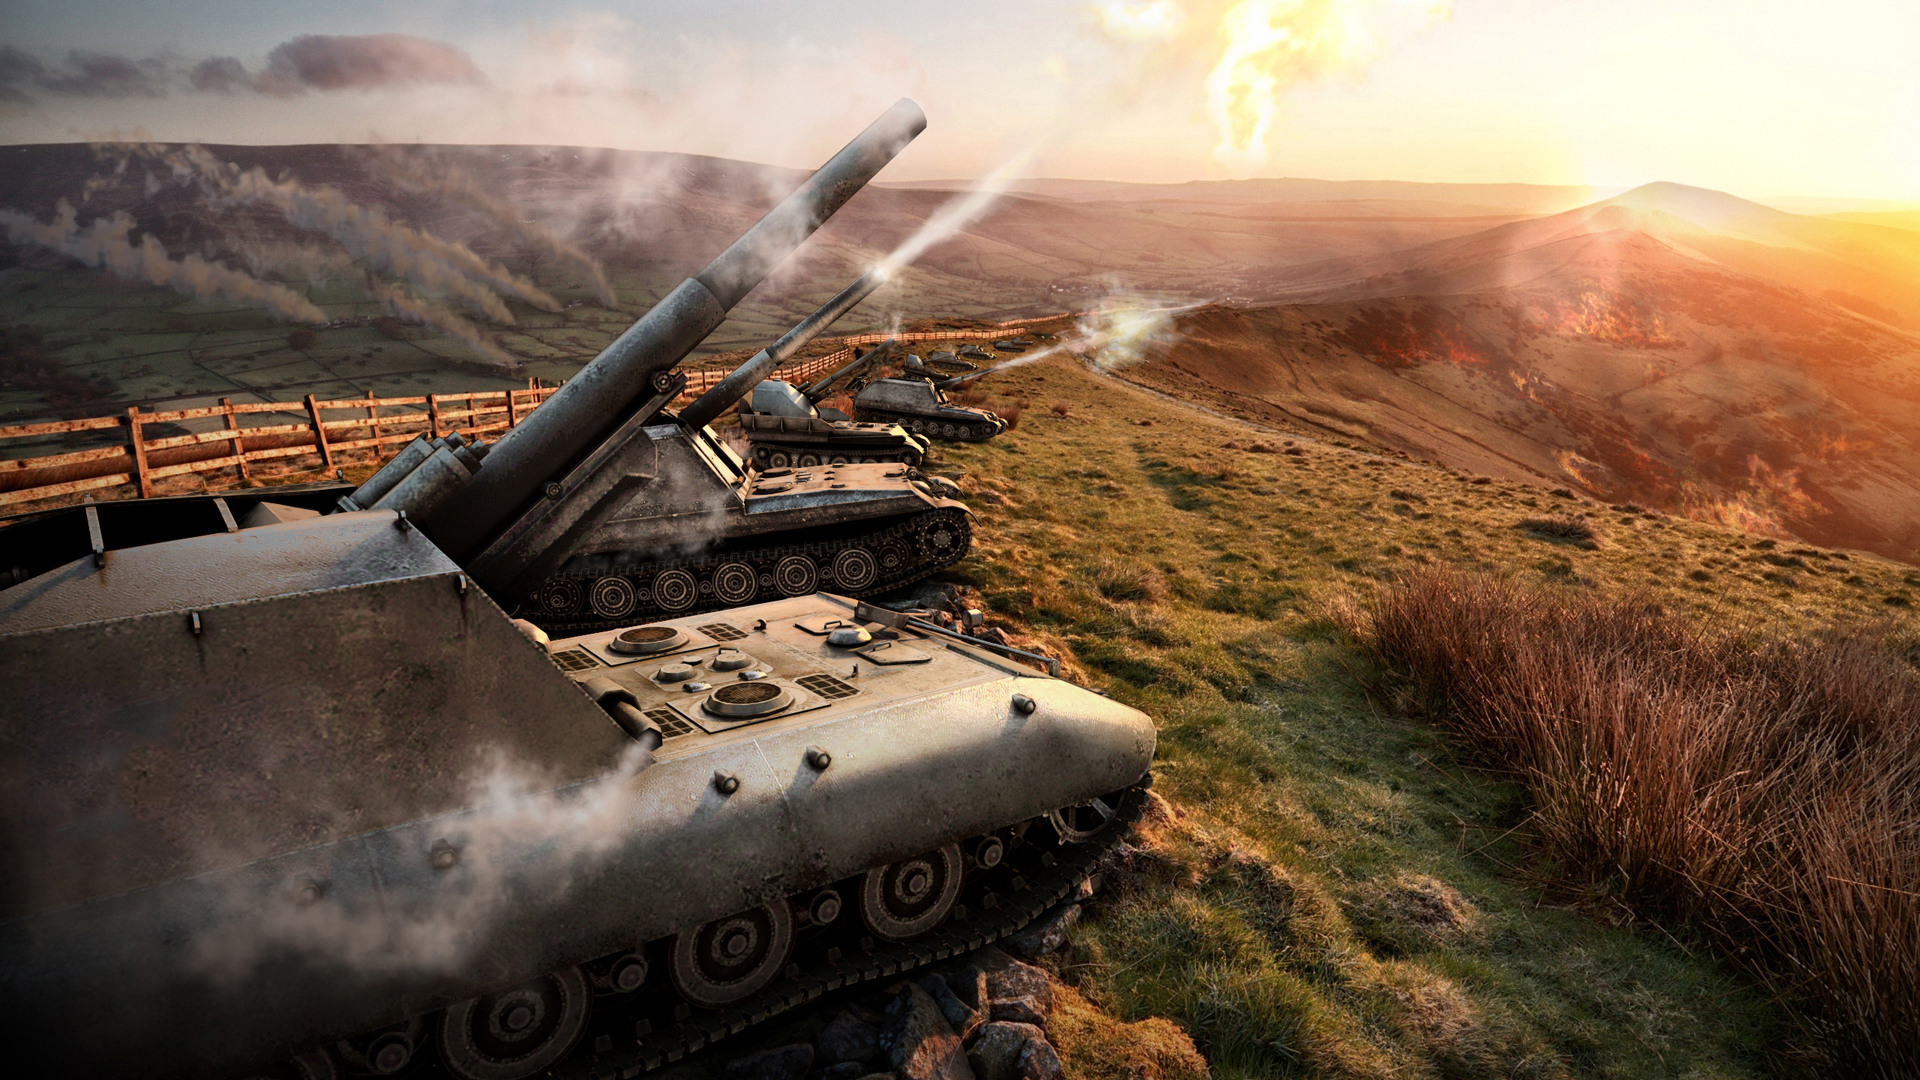 world of tanks wallpaper,combat vehicle,strategy video game,tank,pc game,self propelled artillery